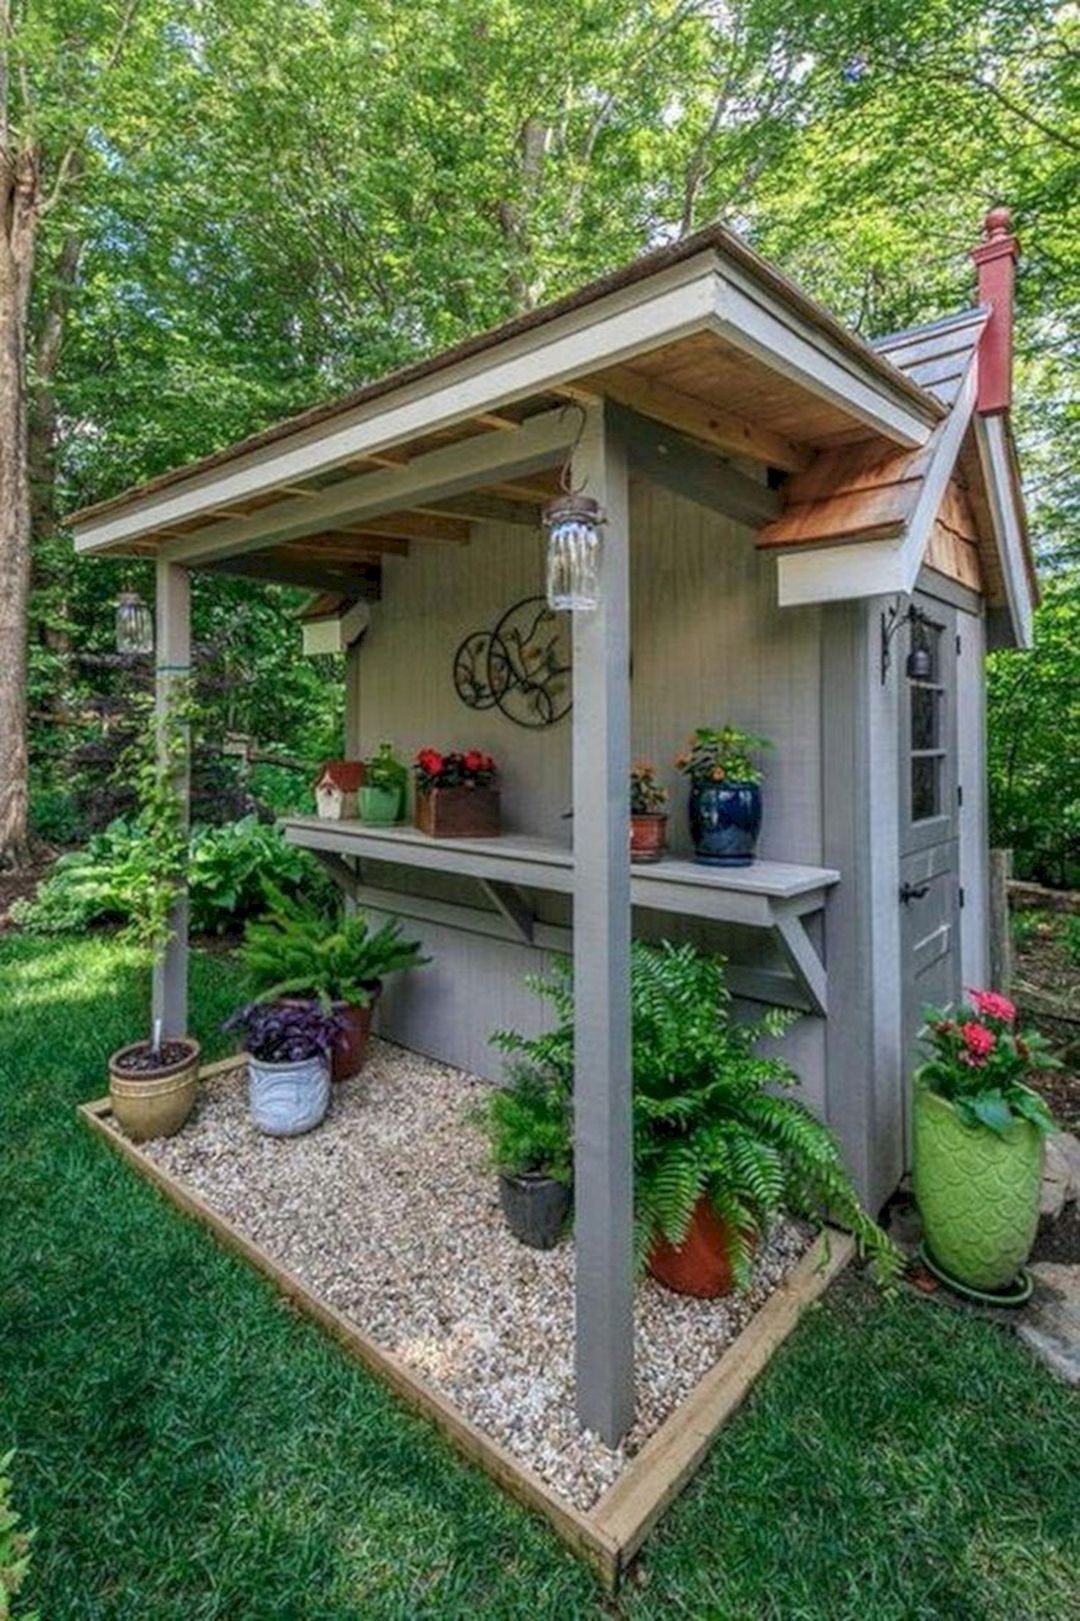 18 Best DIY Backyard Shed Ideas You Have To Know - 18 Best DIY Backyard Shed Ideas You Have To Know -   17 diy Garden shed ideas